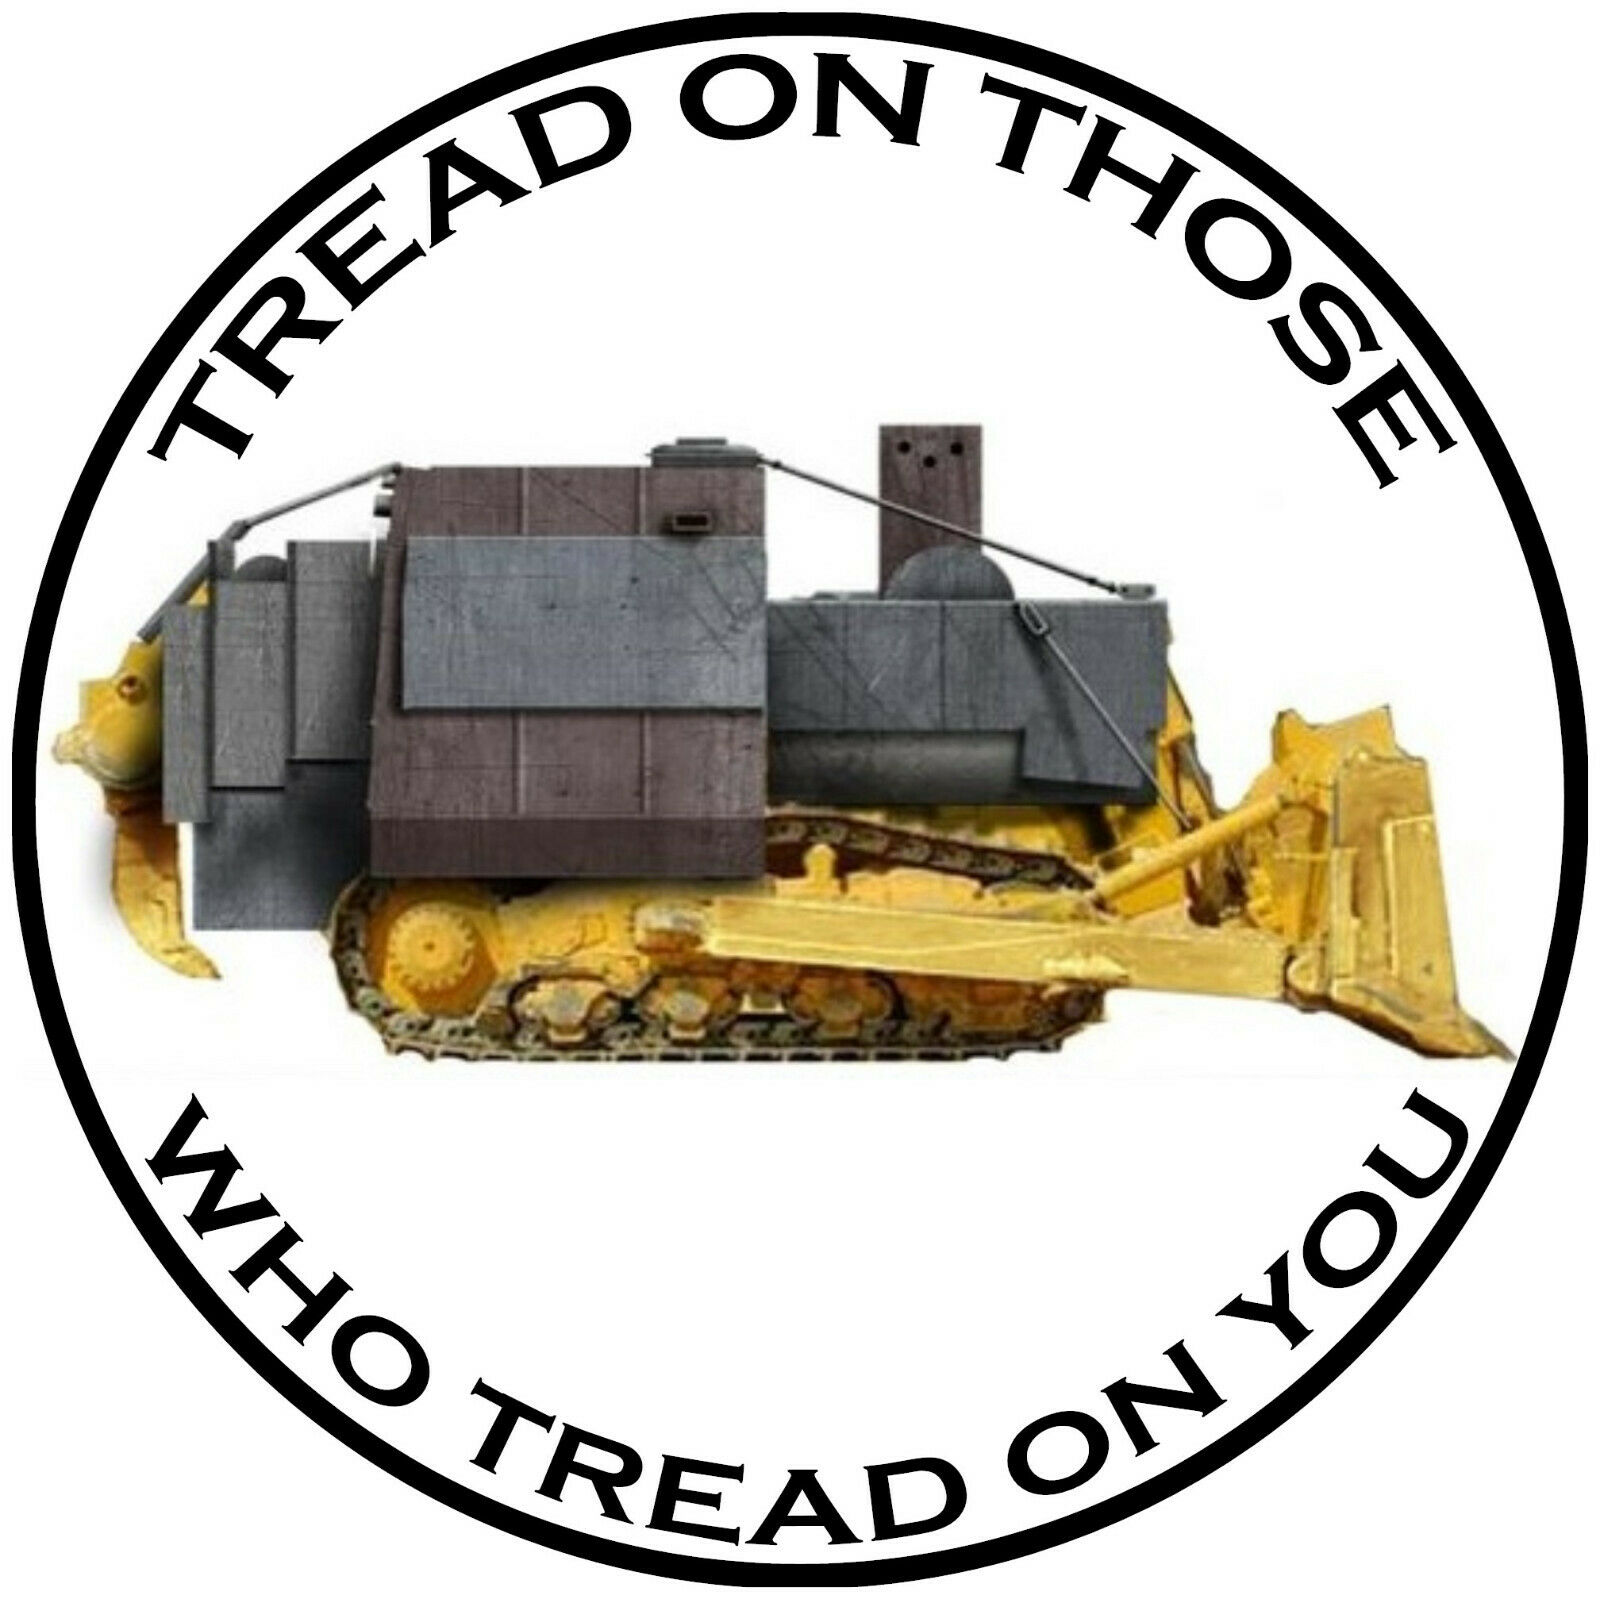 Killdozer Round Sticker Decal Tread On Those Who Tread On You (select Your Size)